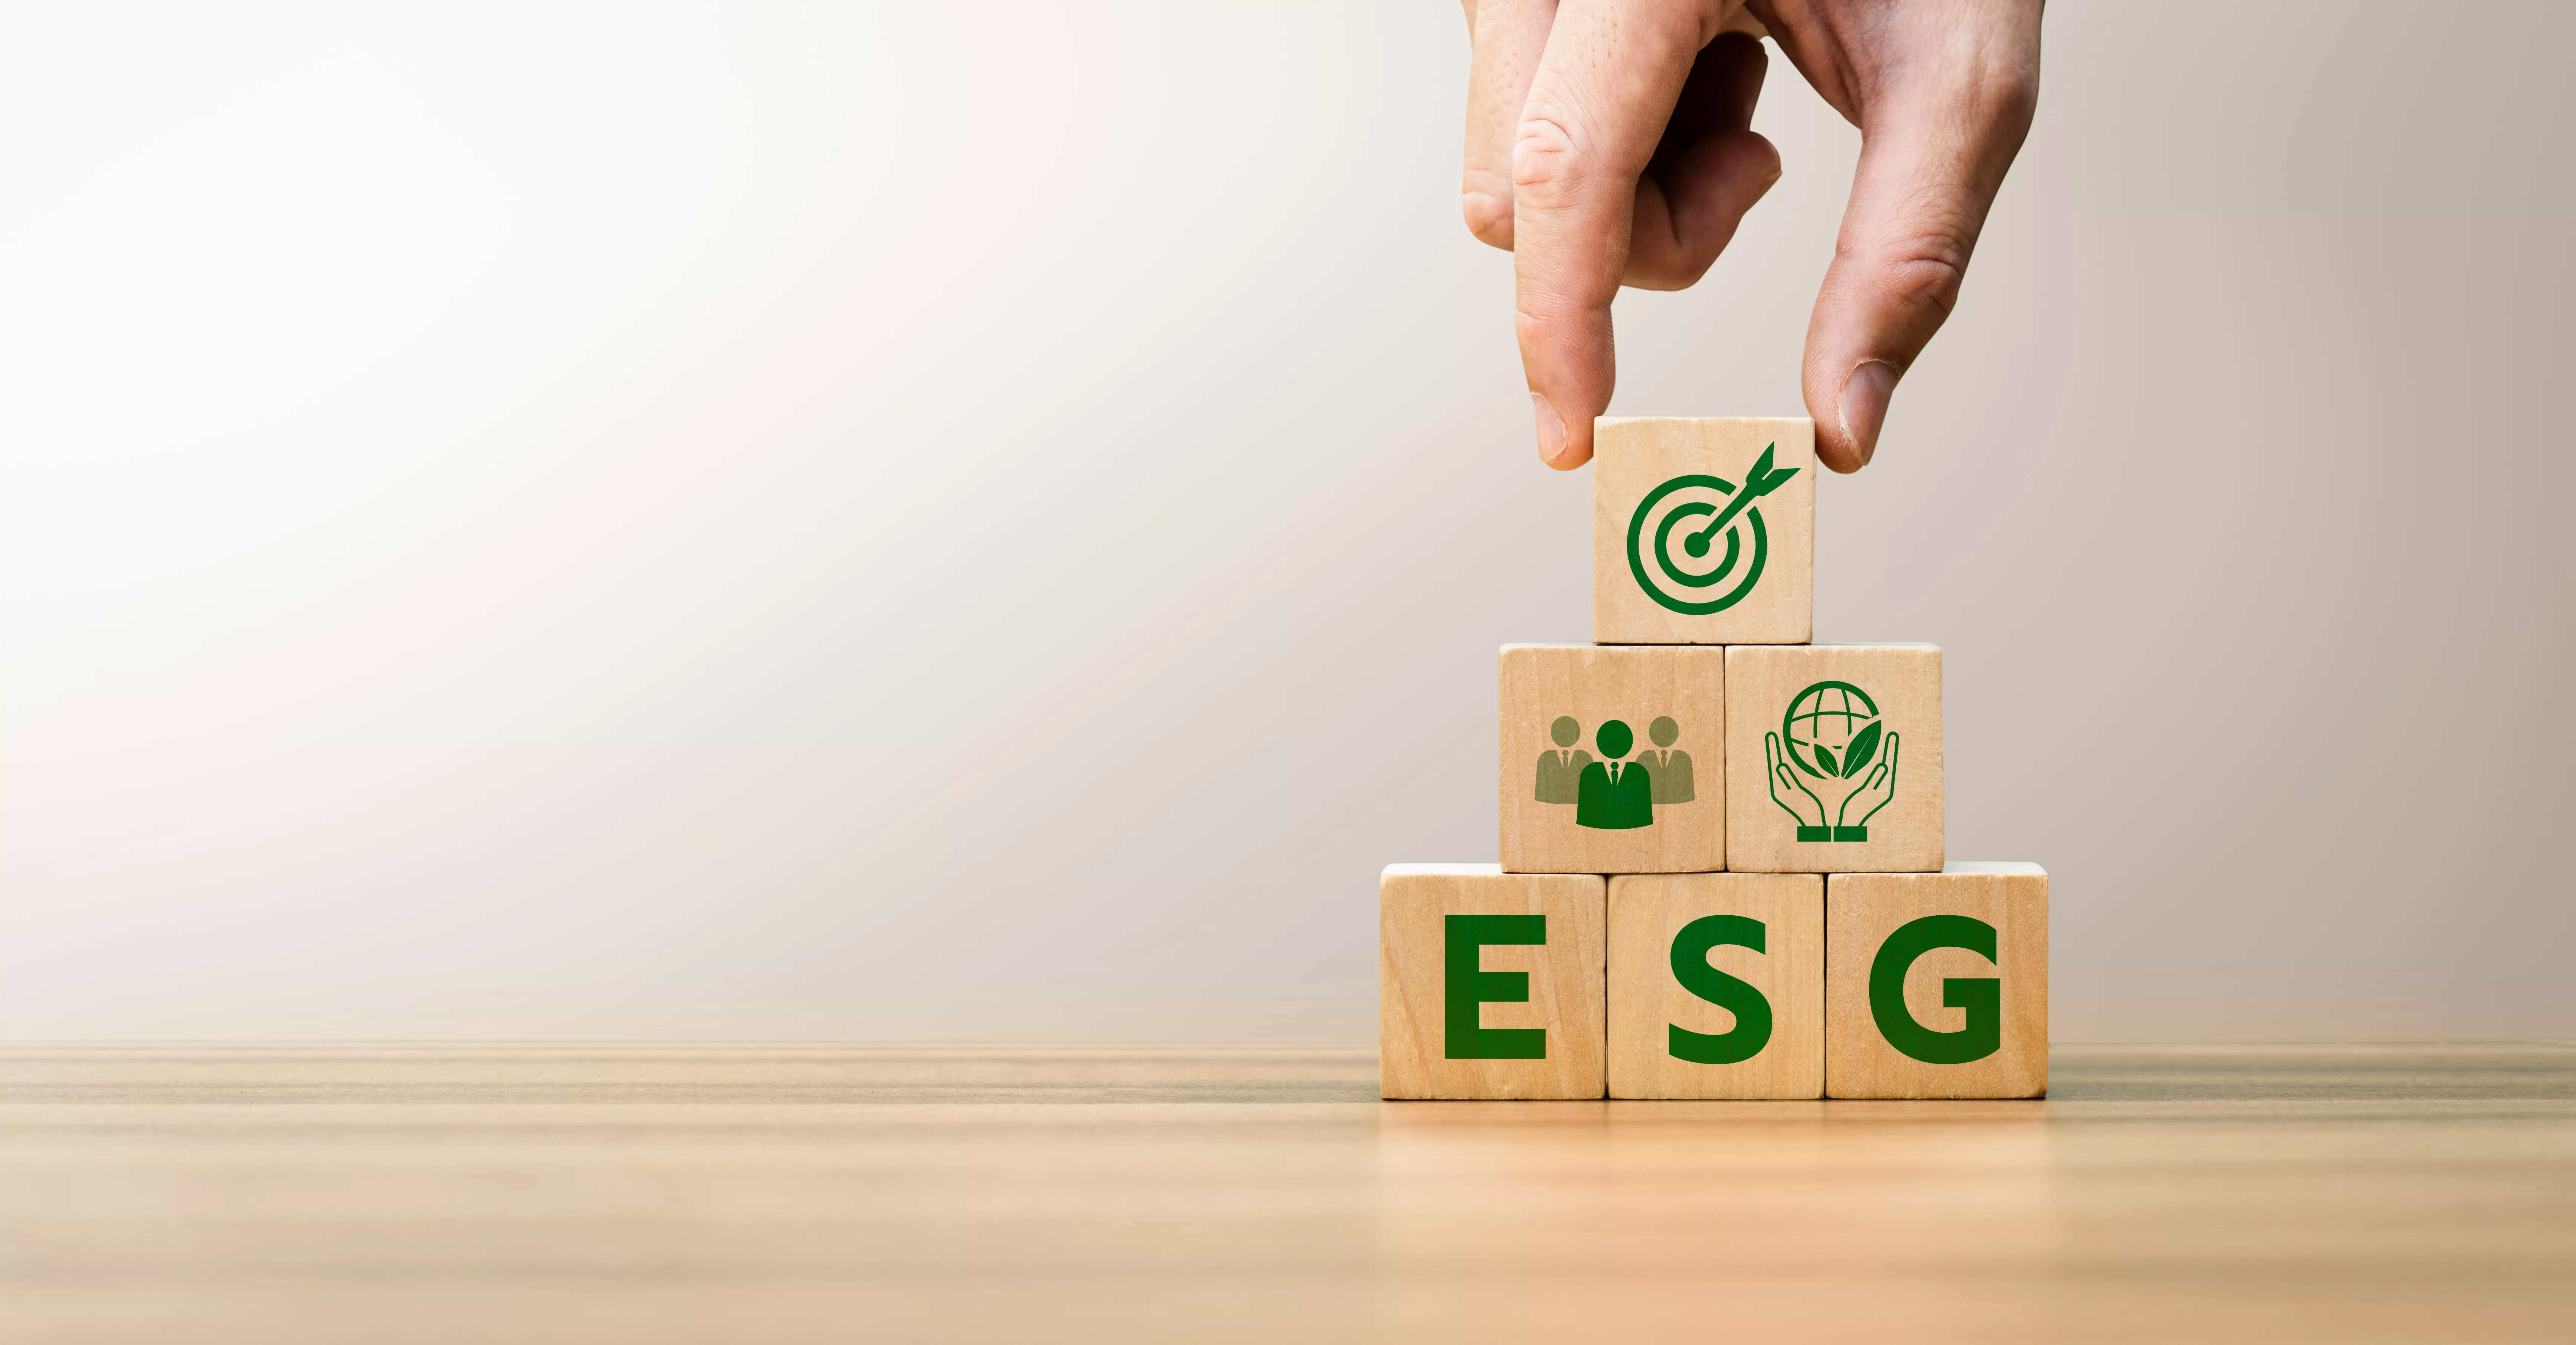 ESG Goals, Nurturing Environment, Empowering Society, Upholding Governance for Sustainable Development, Responsible Corporate Citizenship, and Long-Term Value Creation, social business strategy